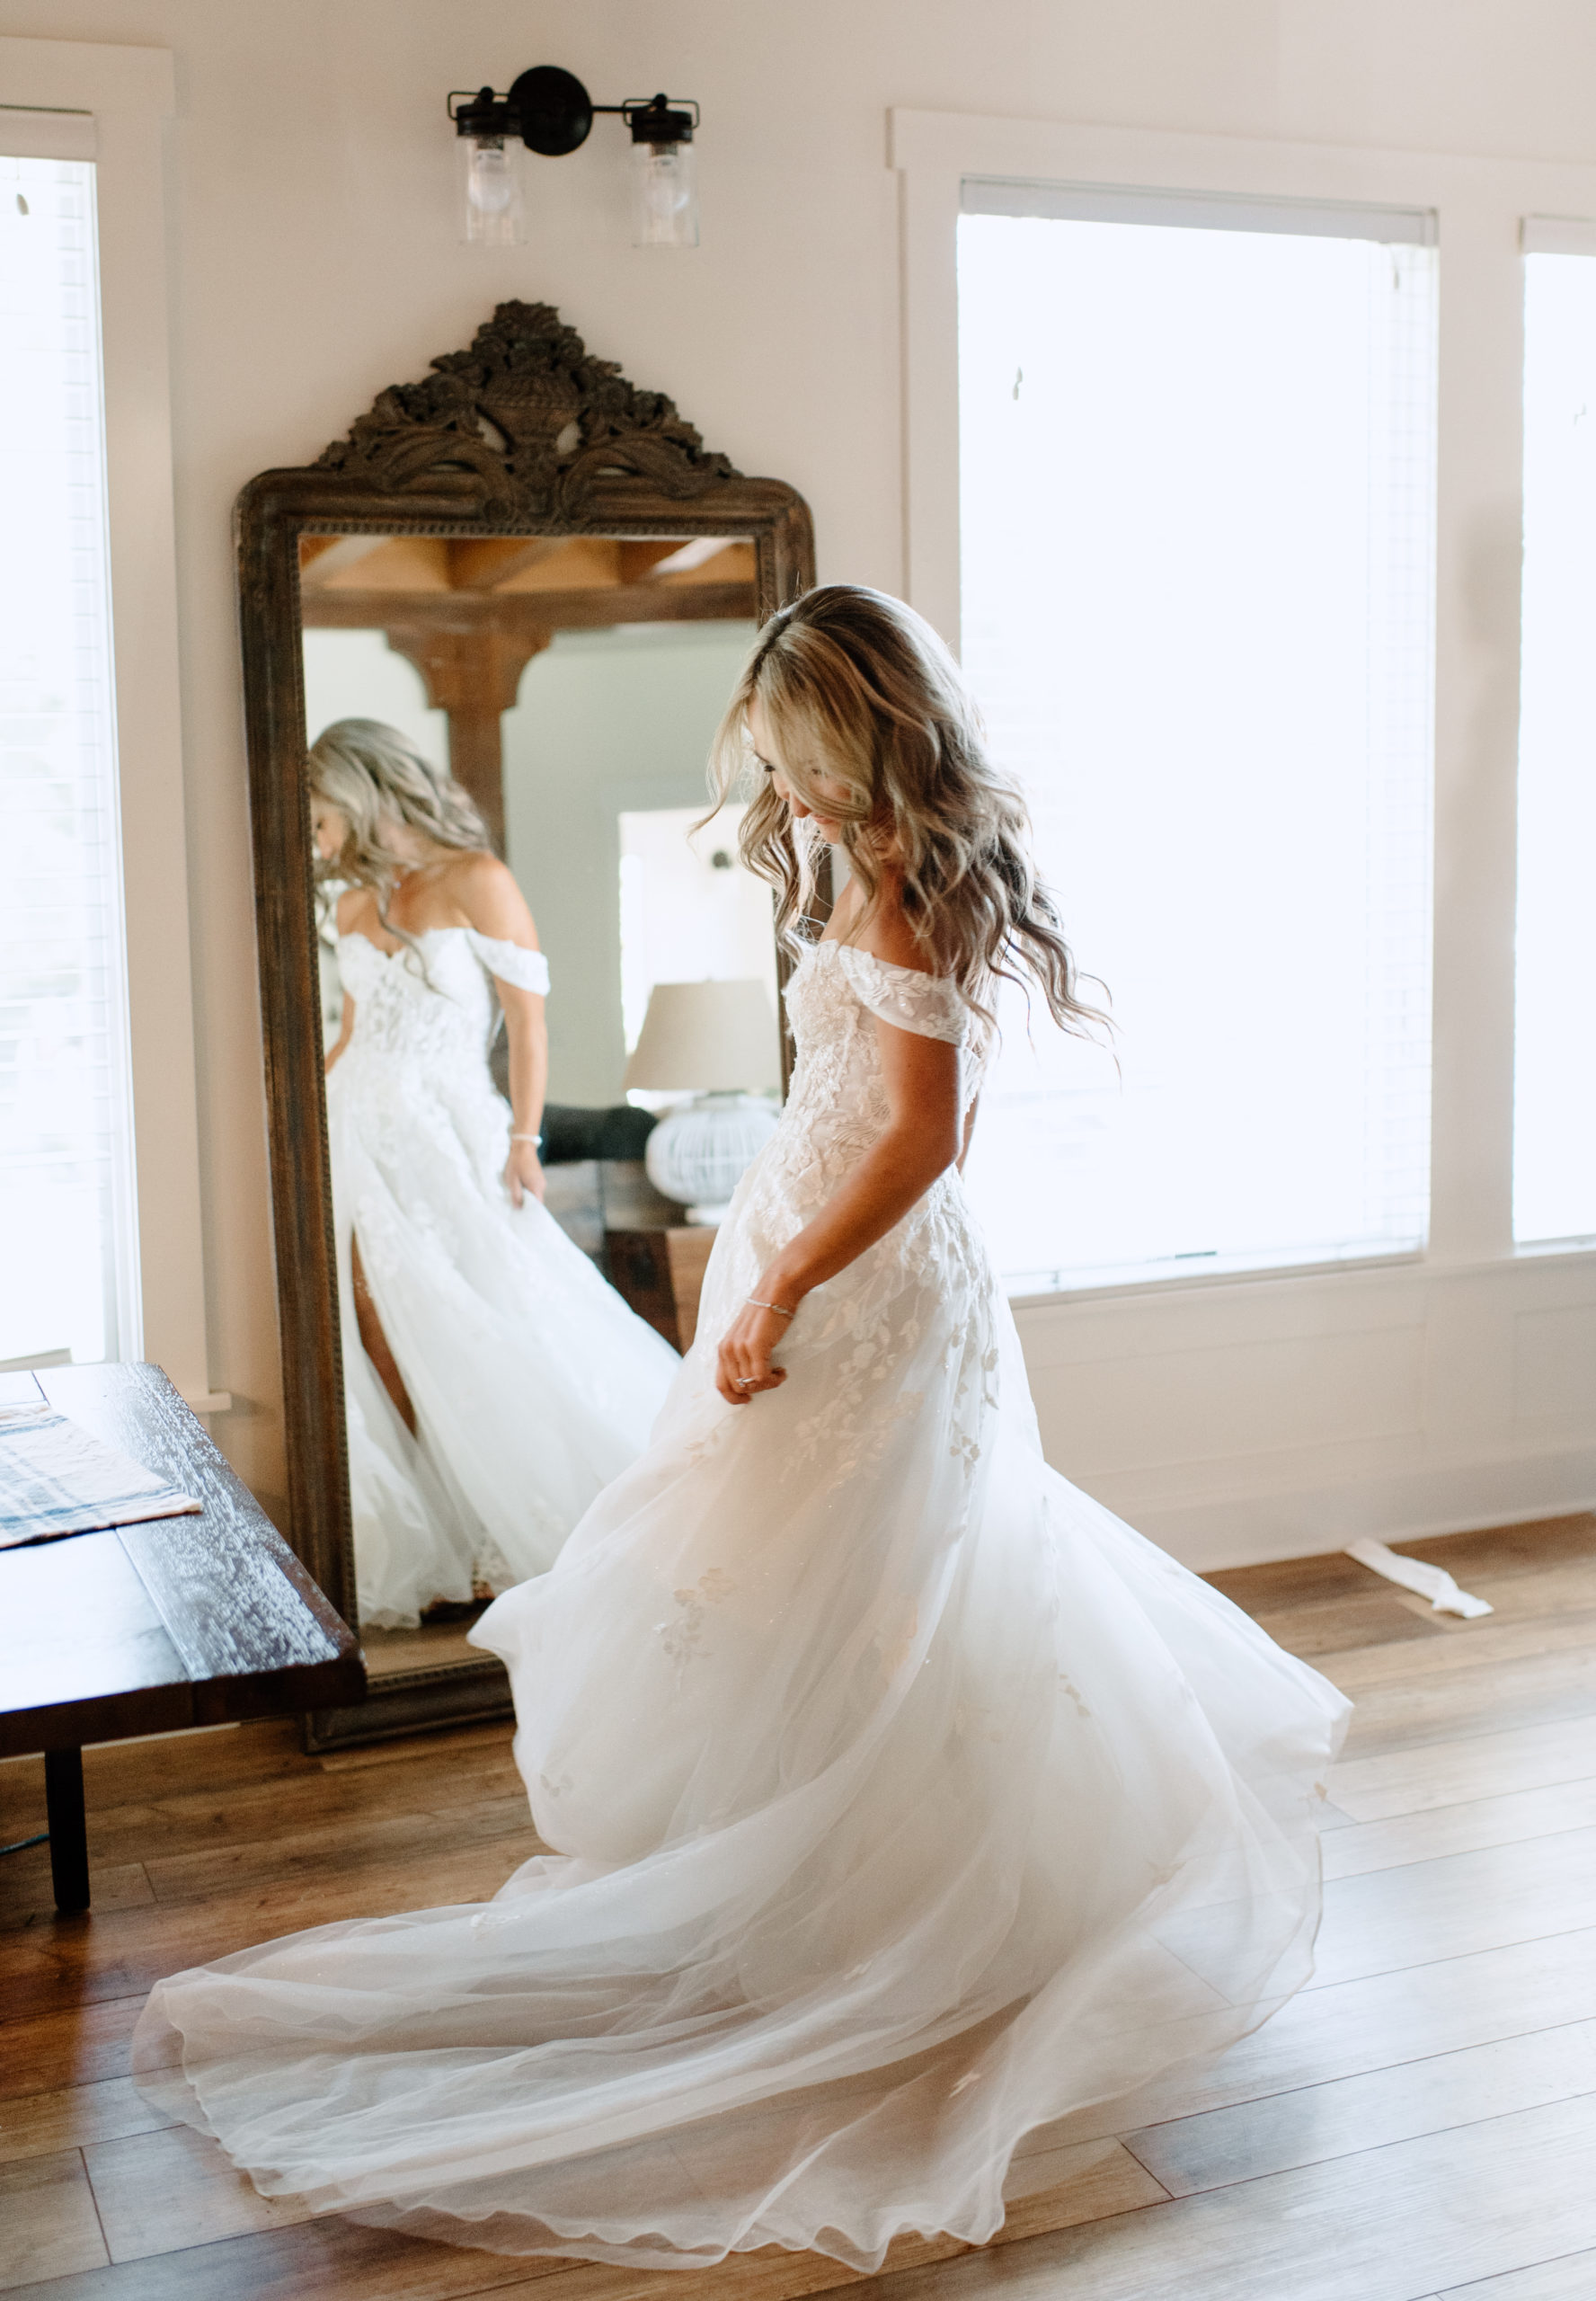 The bride in the bridal suite at the Lake Arrowhead wedding venue